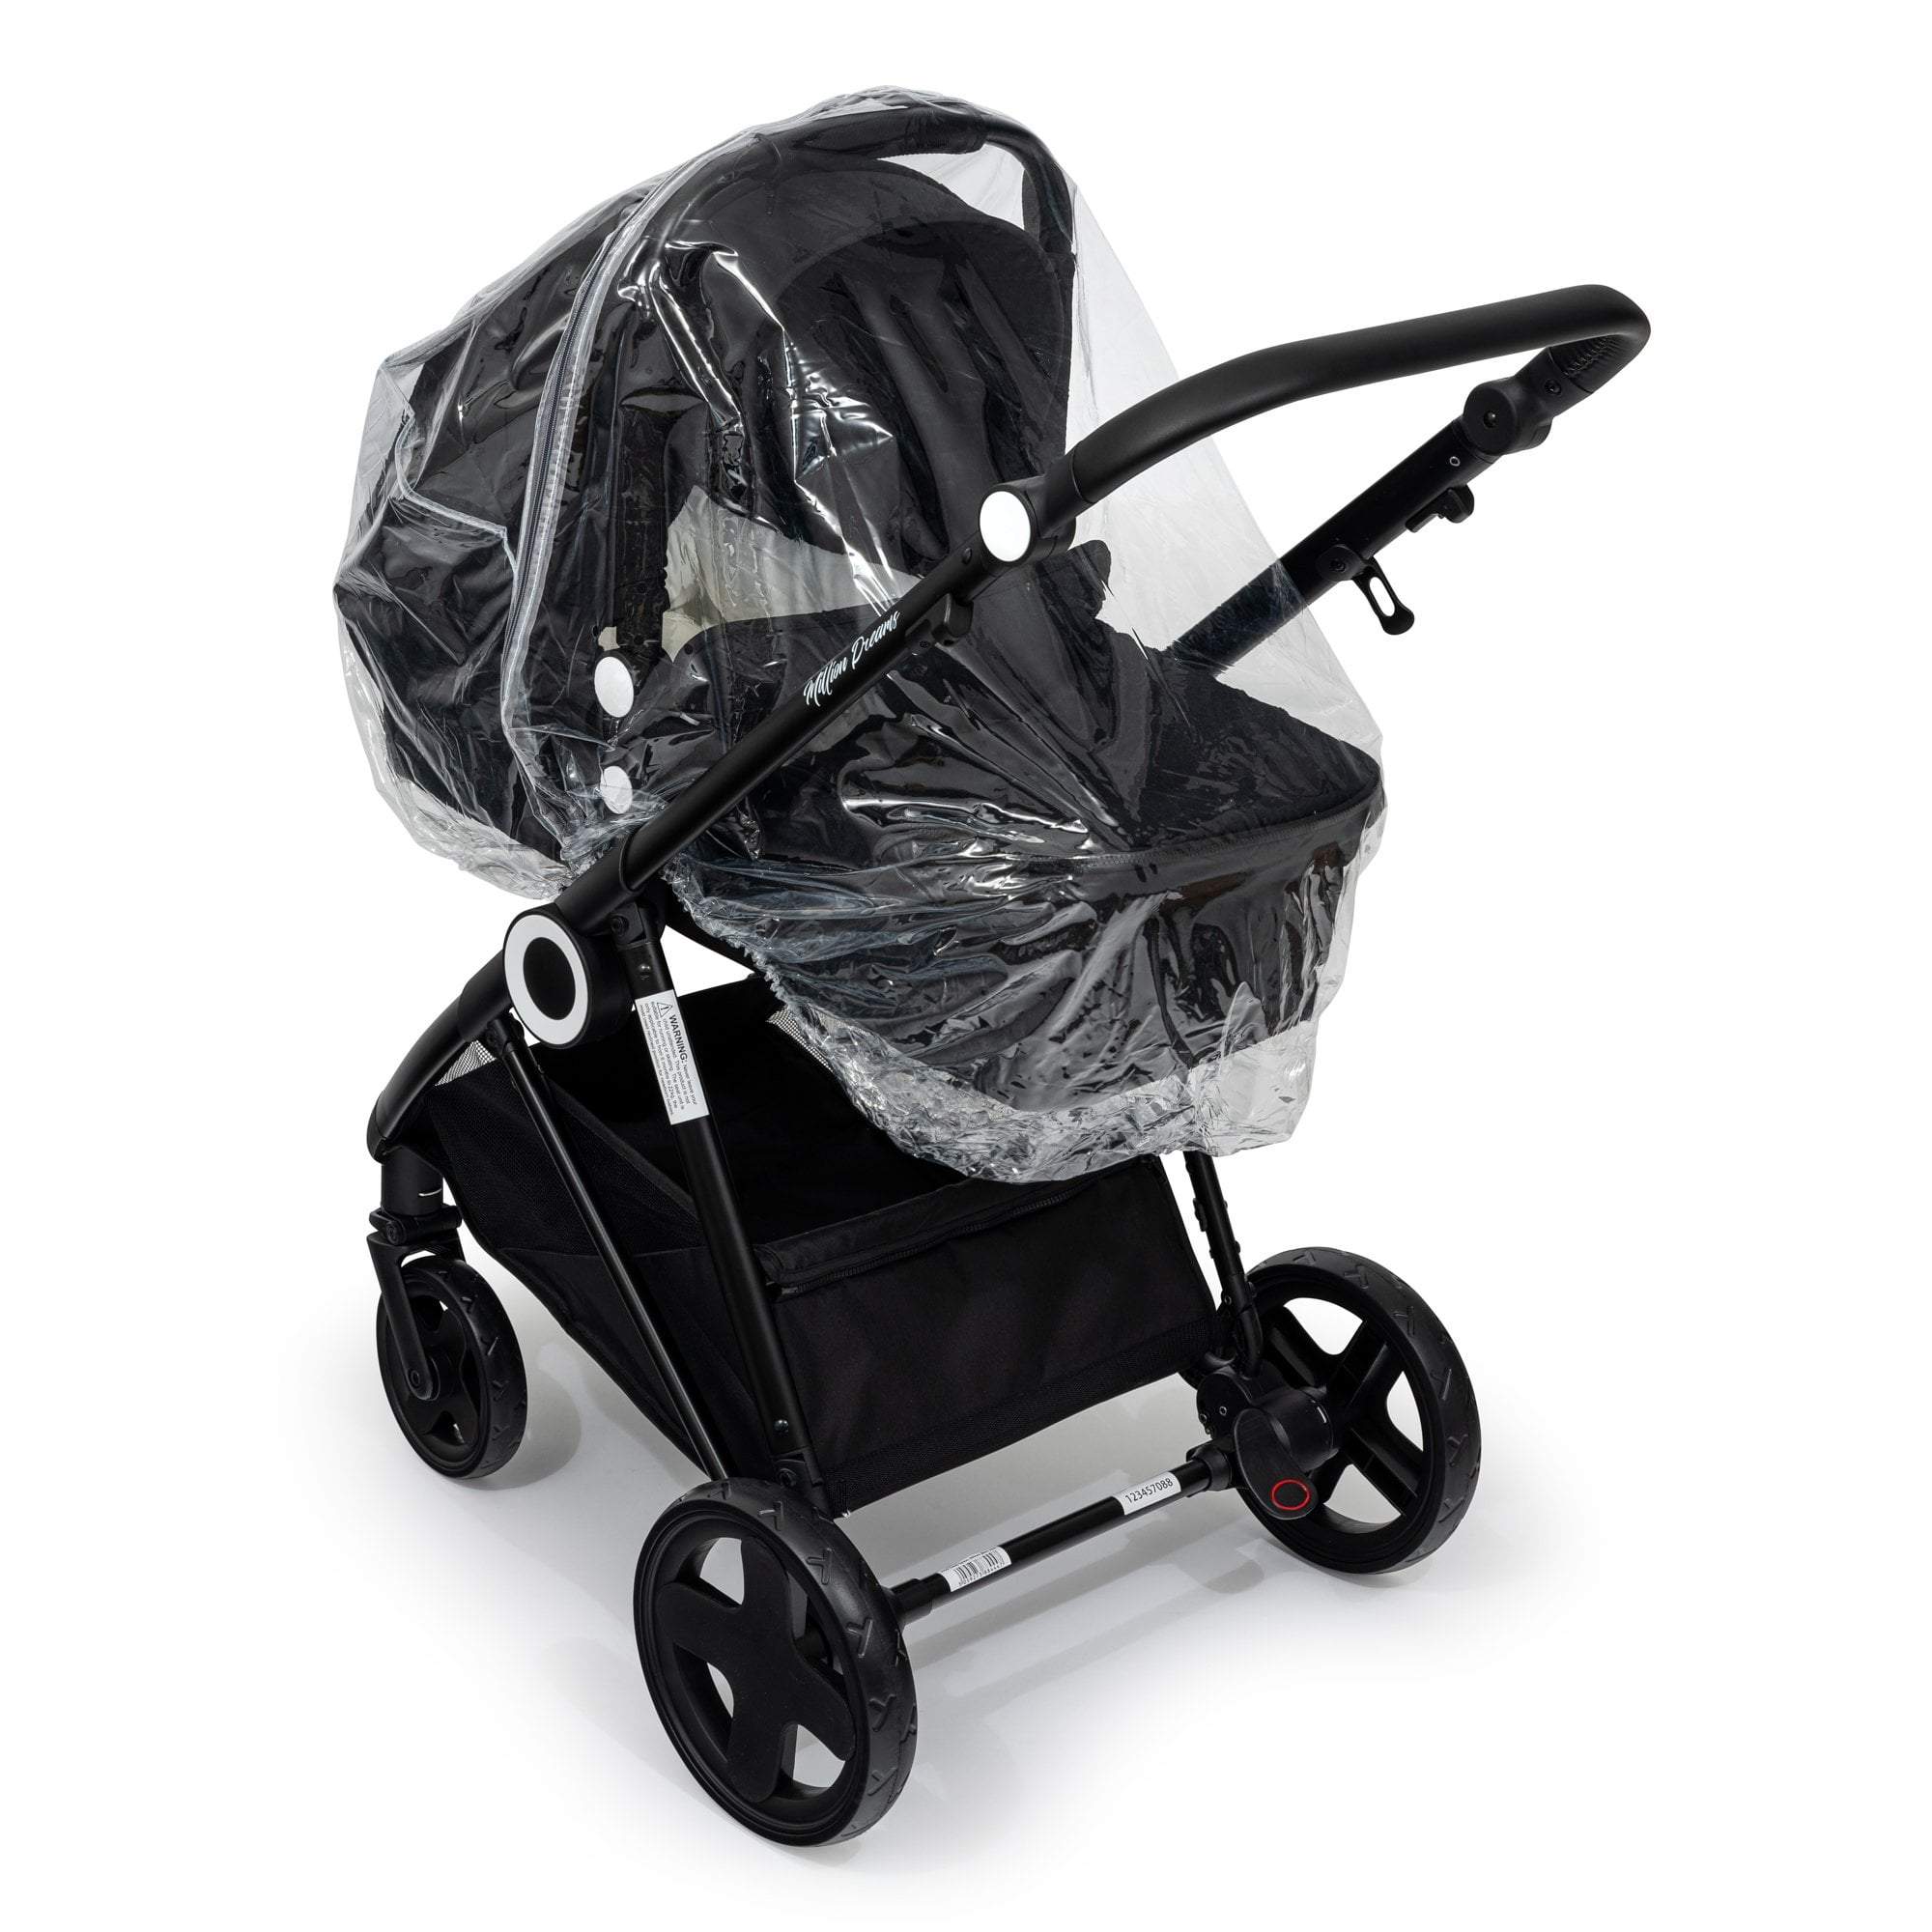 Carrycot Raincover Compatible With Joie - Fits All Models - For Your Little One